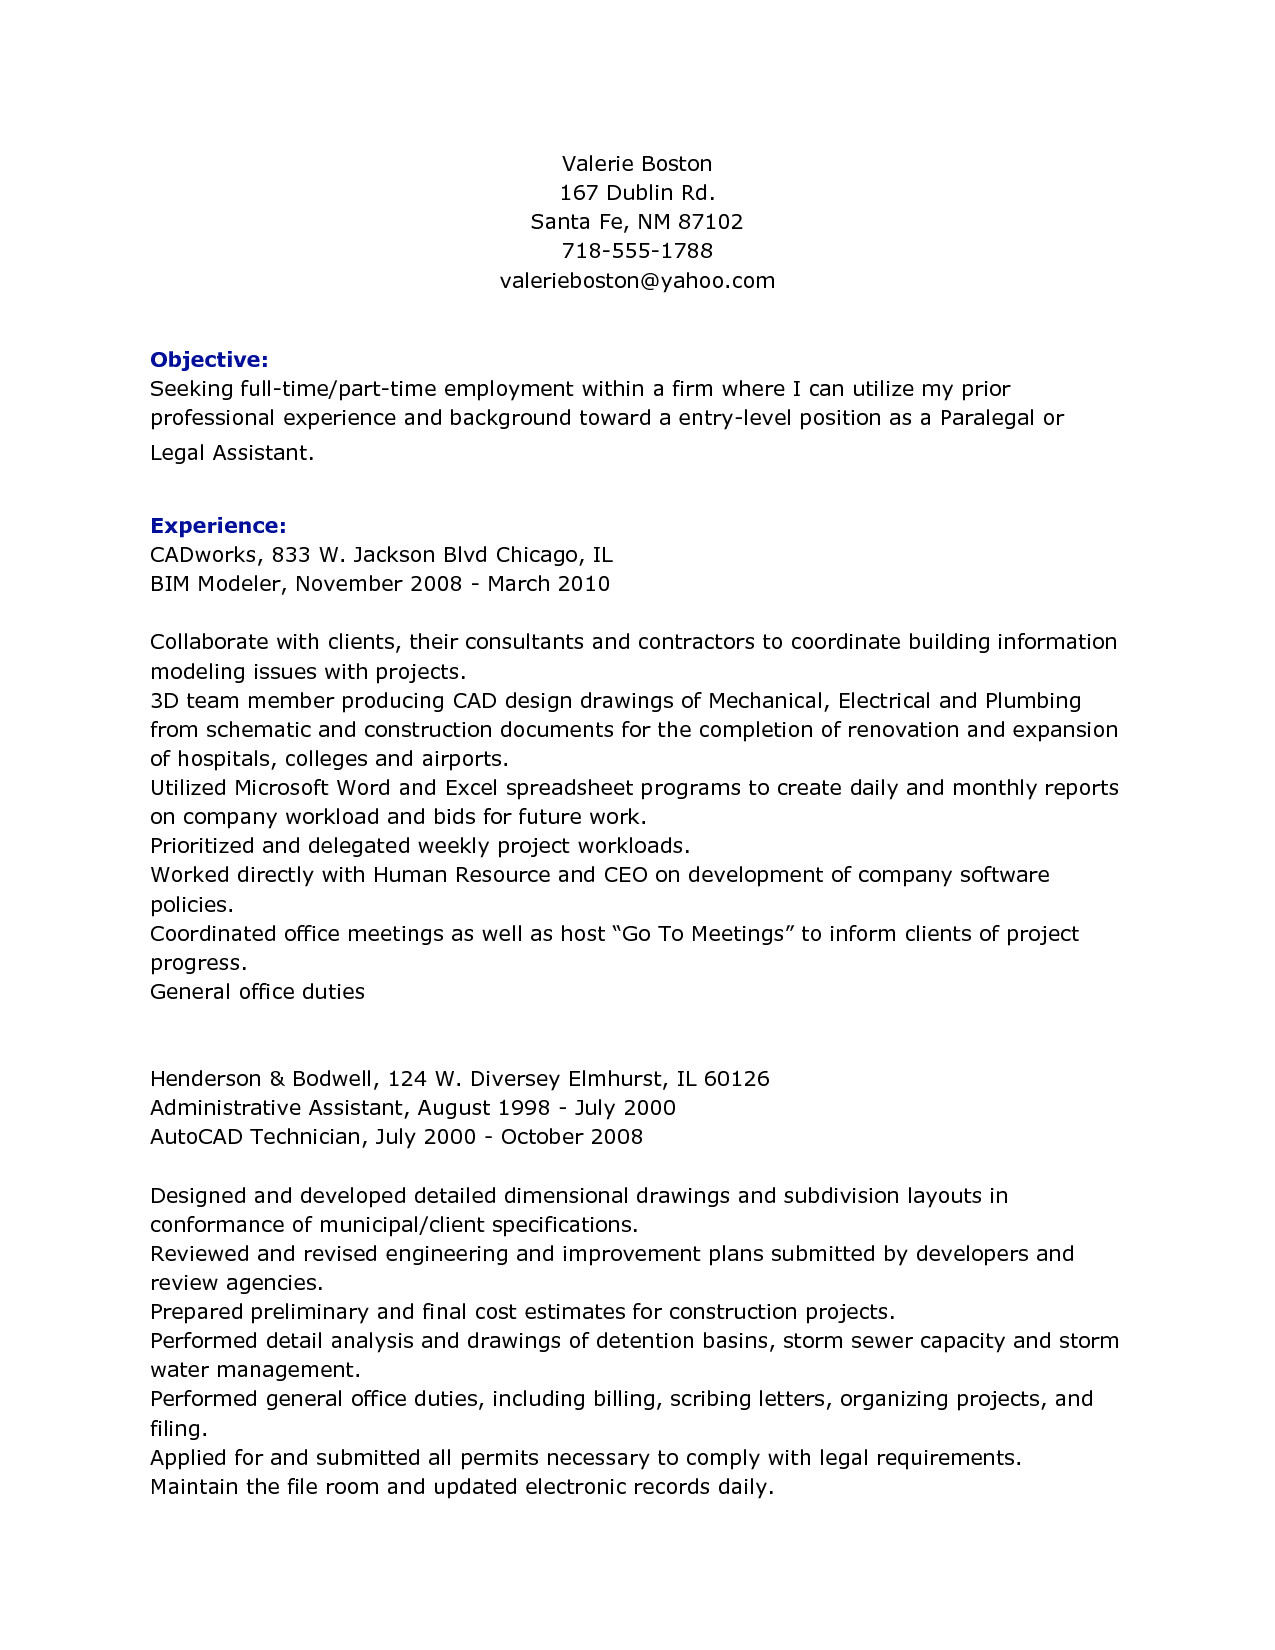 Cover Letter Examples U Meyta pertaining to dimensions 1275 X 1650